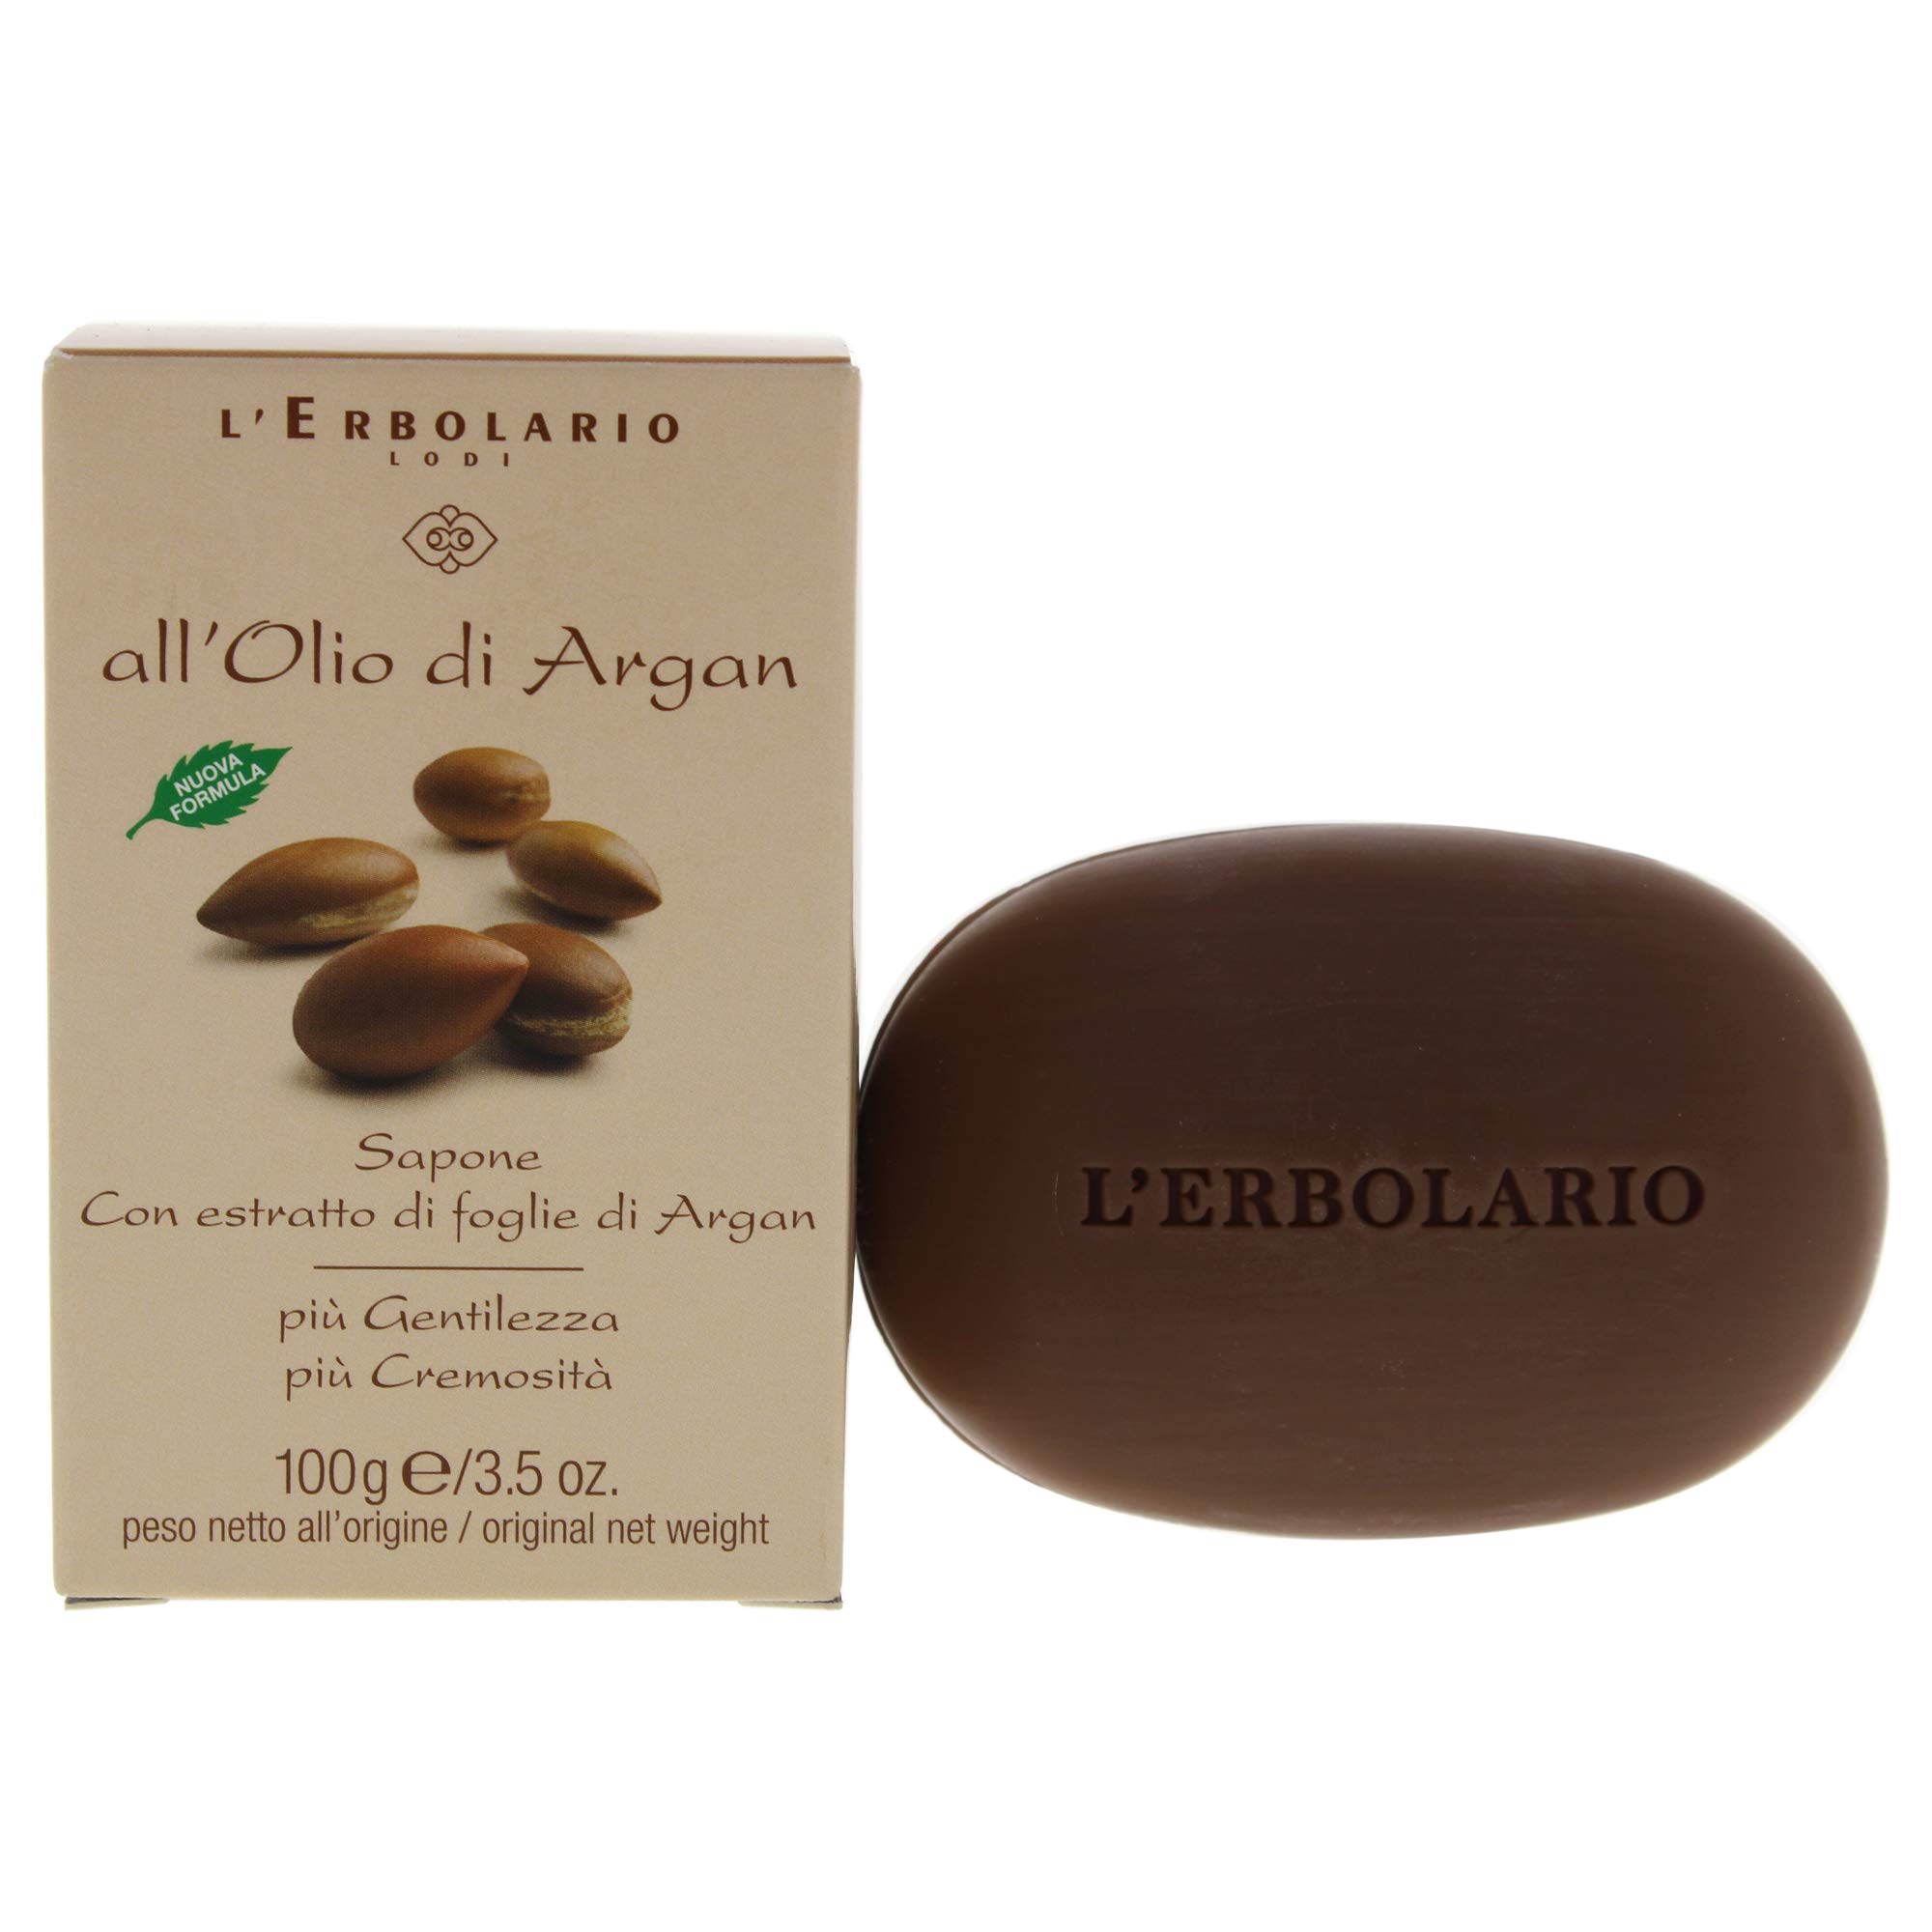 L'Erbolario Argan Oil Bar Soap - Enriched With All Natural Ingredients And Aromatic Fragrances - Cleanses And Moisturizes Skin - Long Lasting And Creates A Rich, Creamy Lather - 3.5 Oz